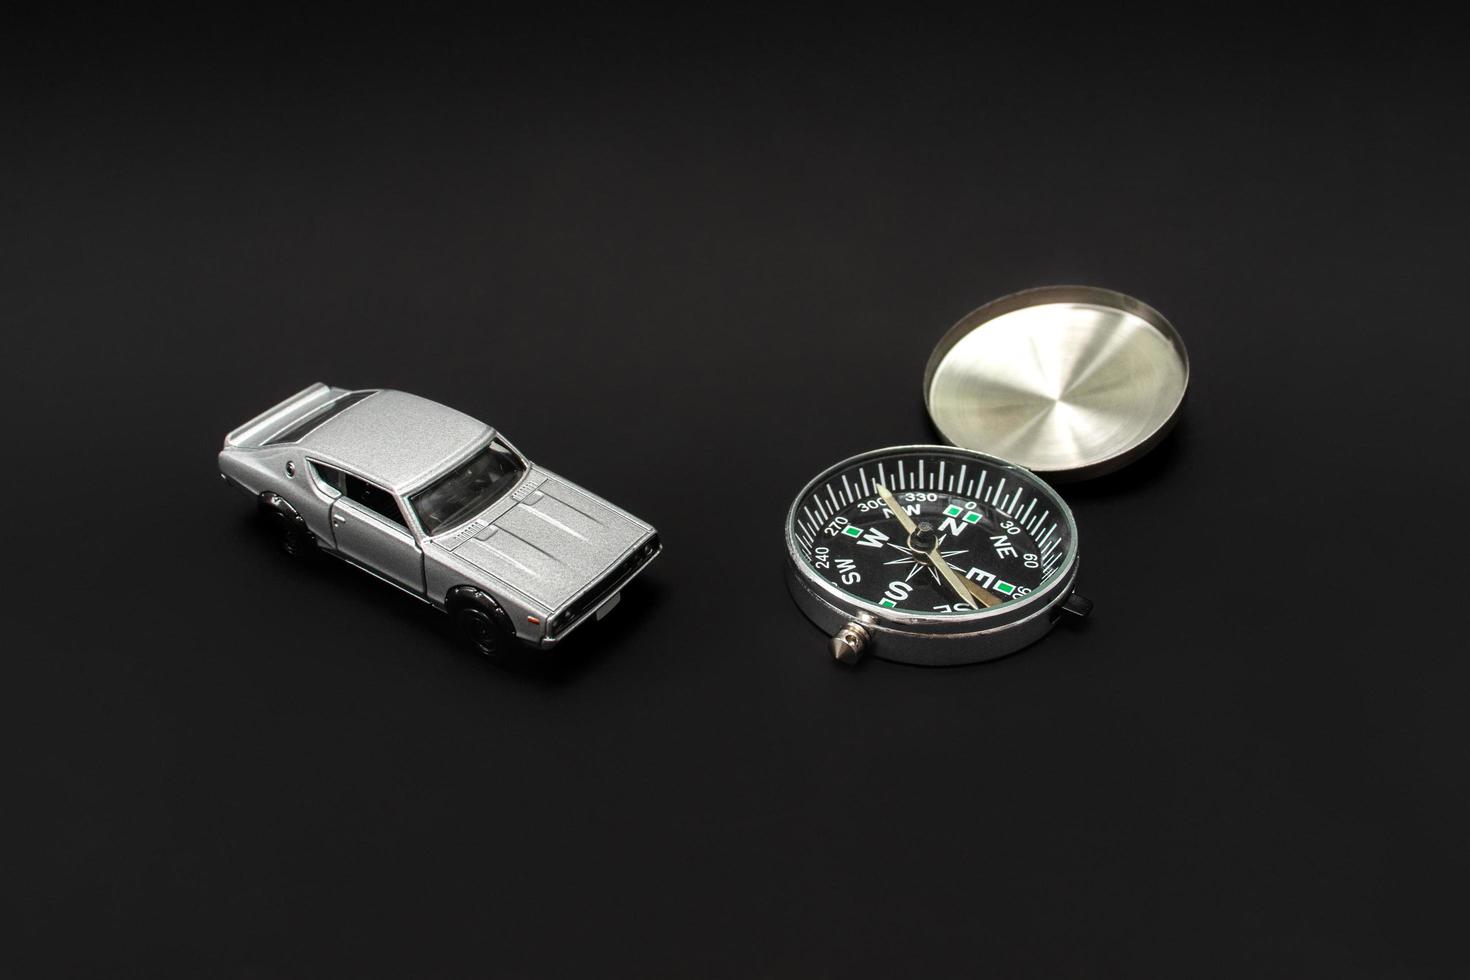 Concept for traveling. Need a guidance like compass or other navigation for traveling. A photo of a toy car and a compass, after some edits.